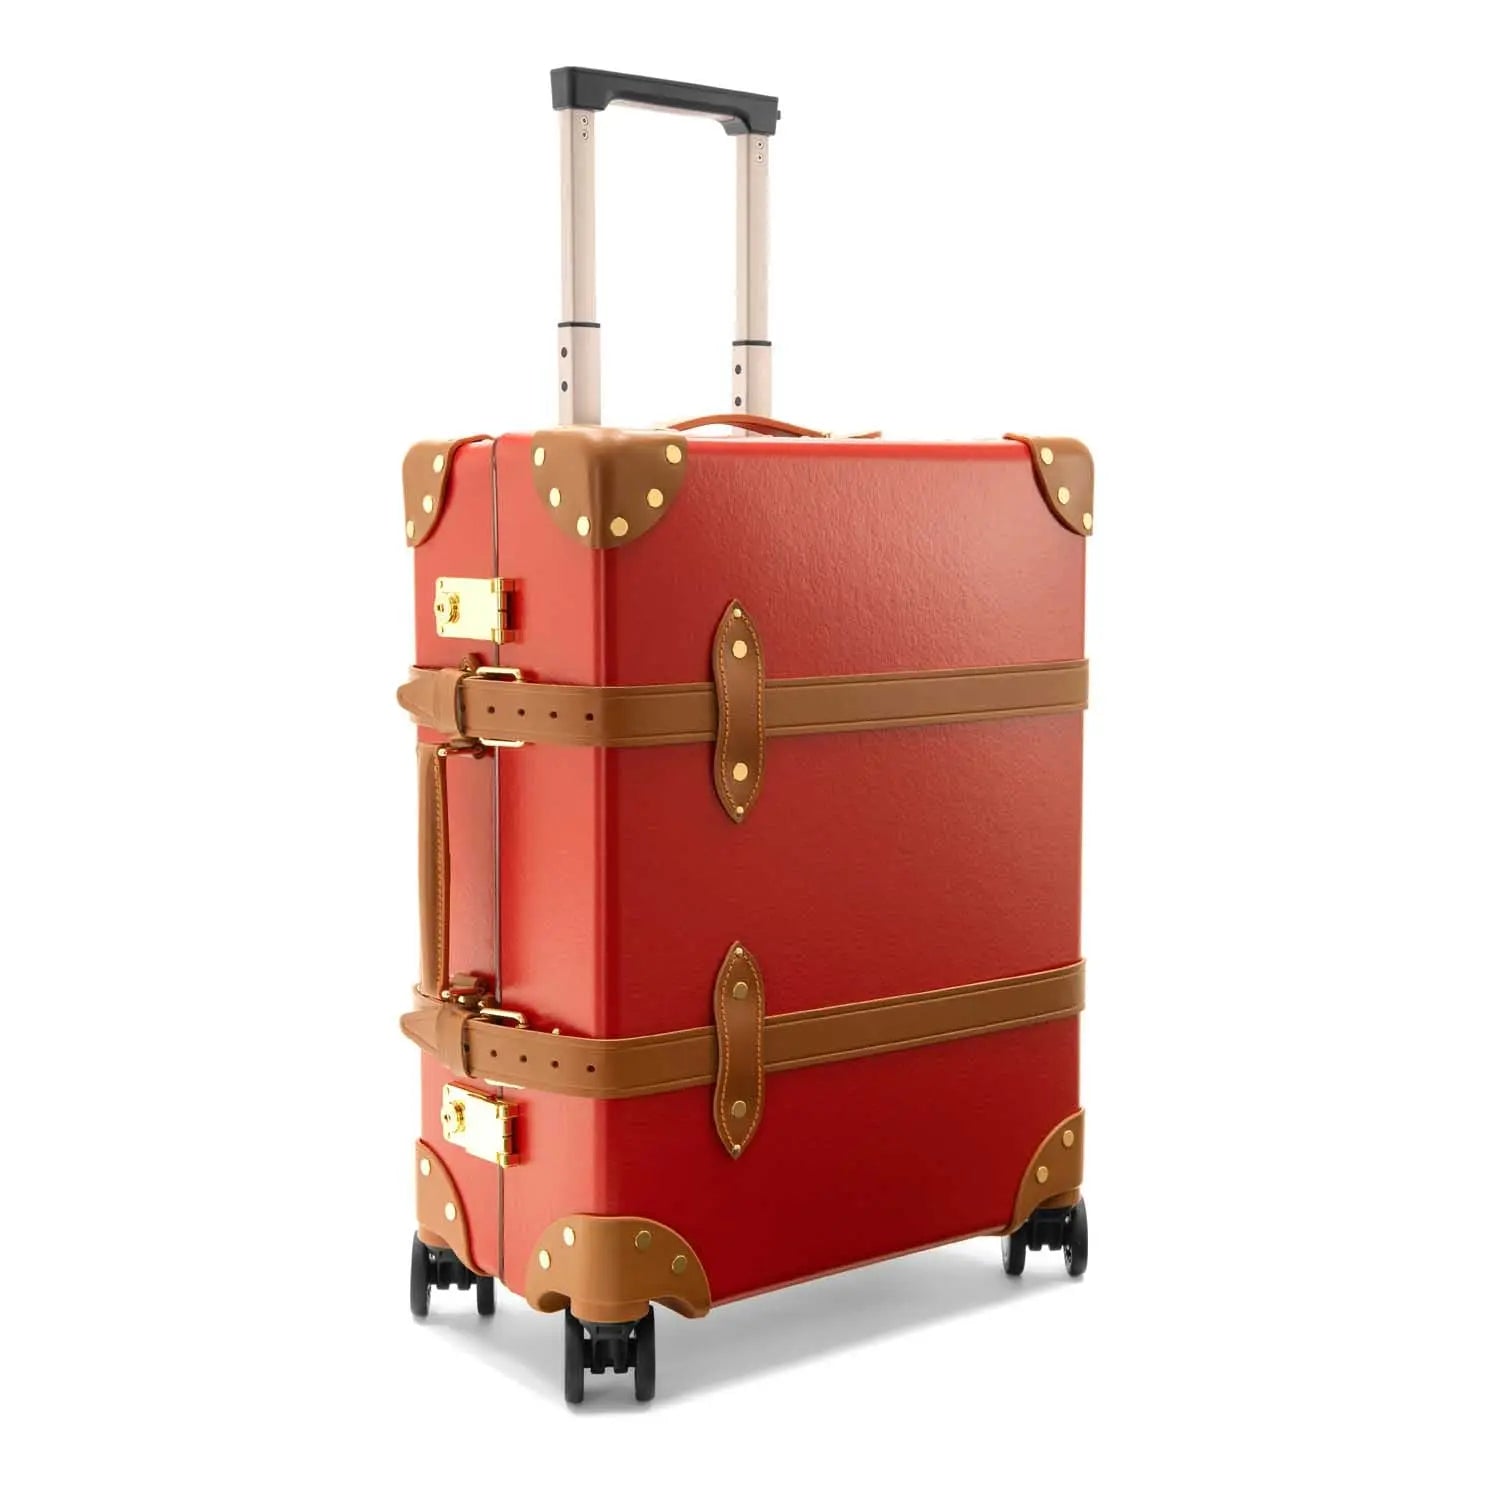 Centenary · Carry-On - 4 Wheels | Red/Caramel/Gold - GLOBE-TROTTER